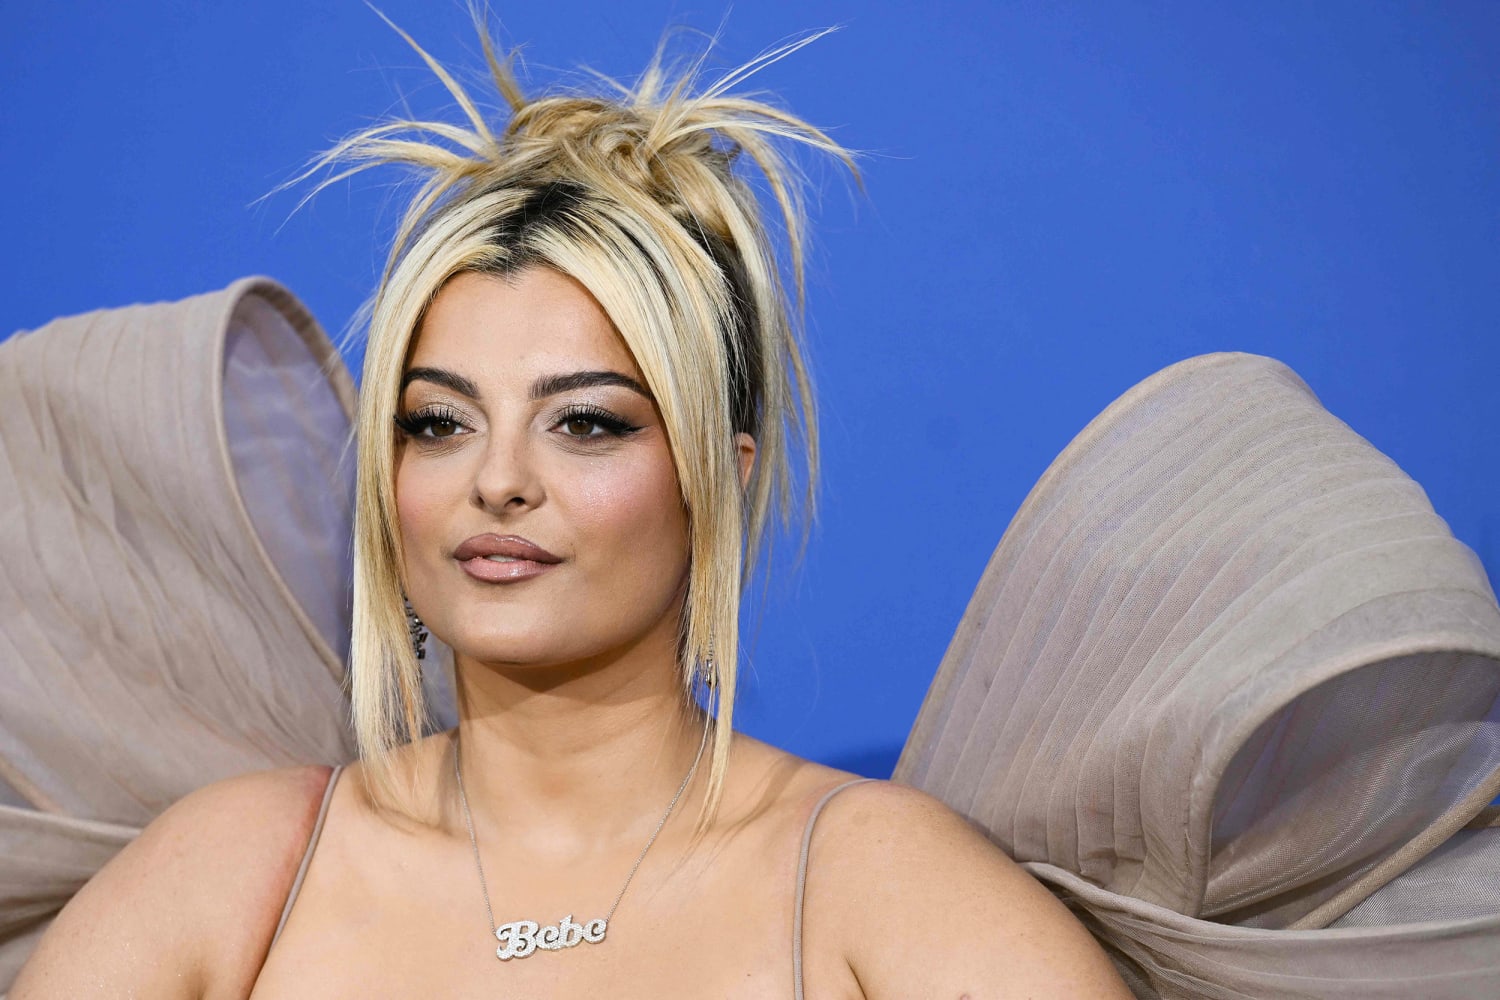 Bebe Rexha was taken to hospital after fans threw her phone in the middle of her concert